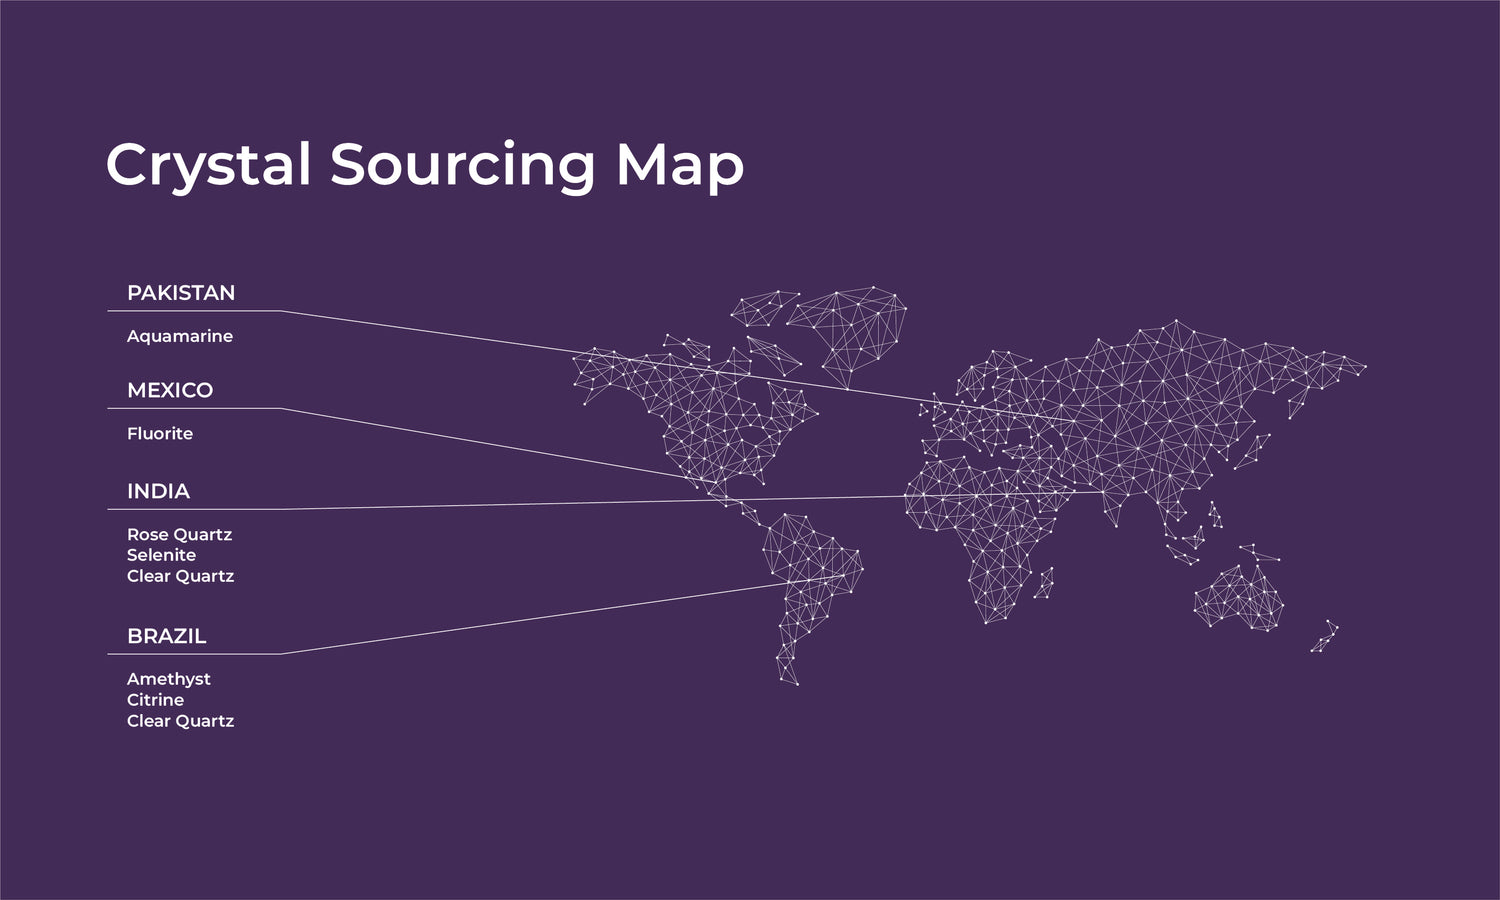 a map that shows ethical sourcing of crystals from all over the world